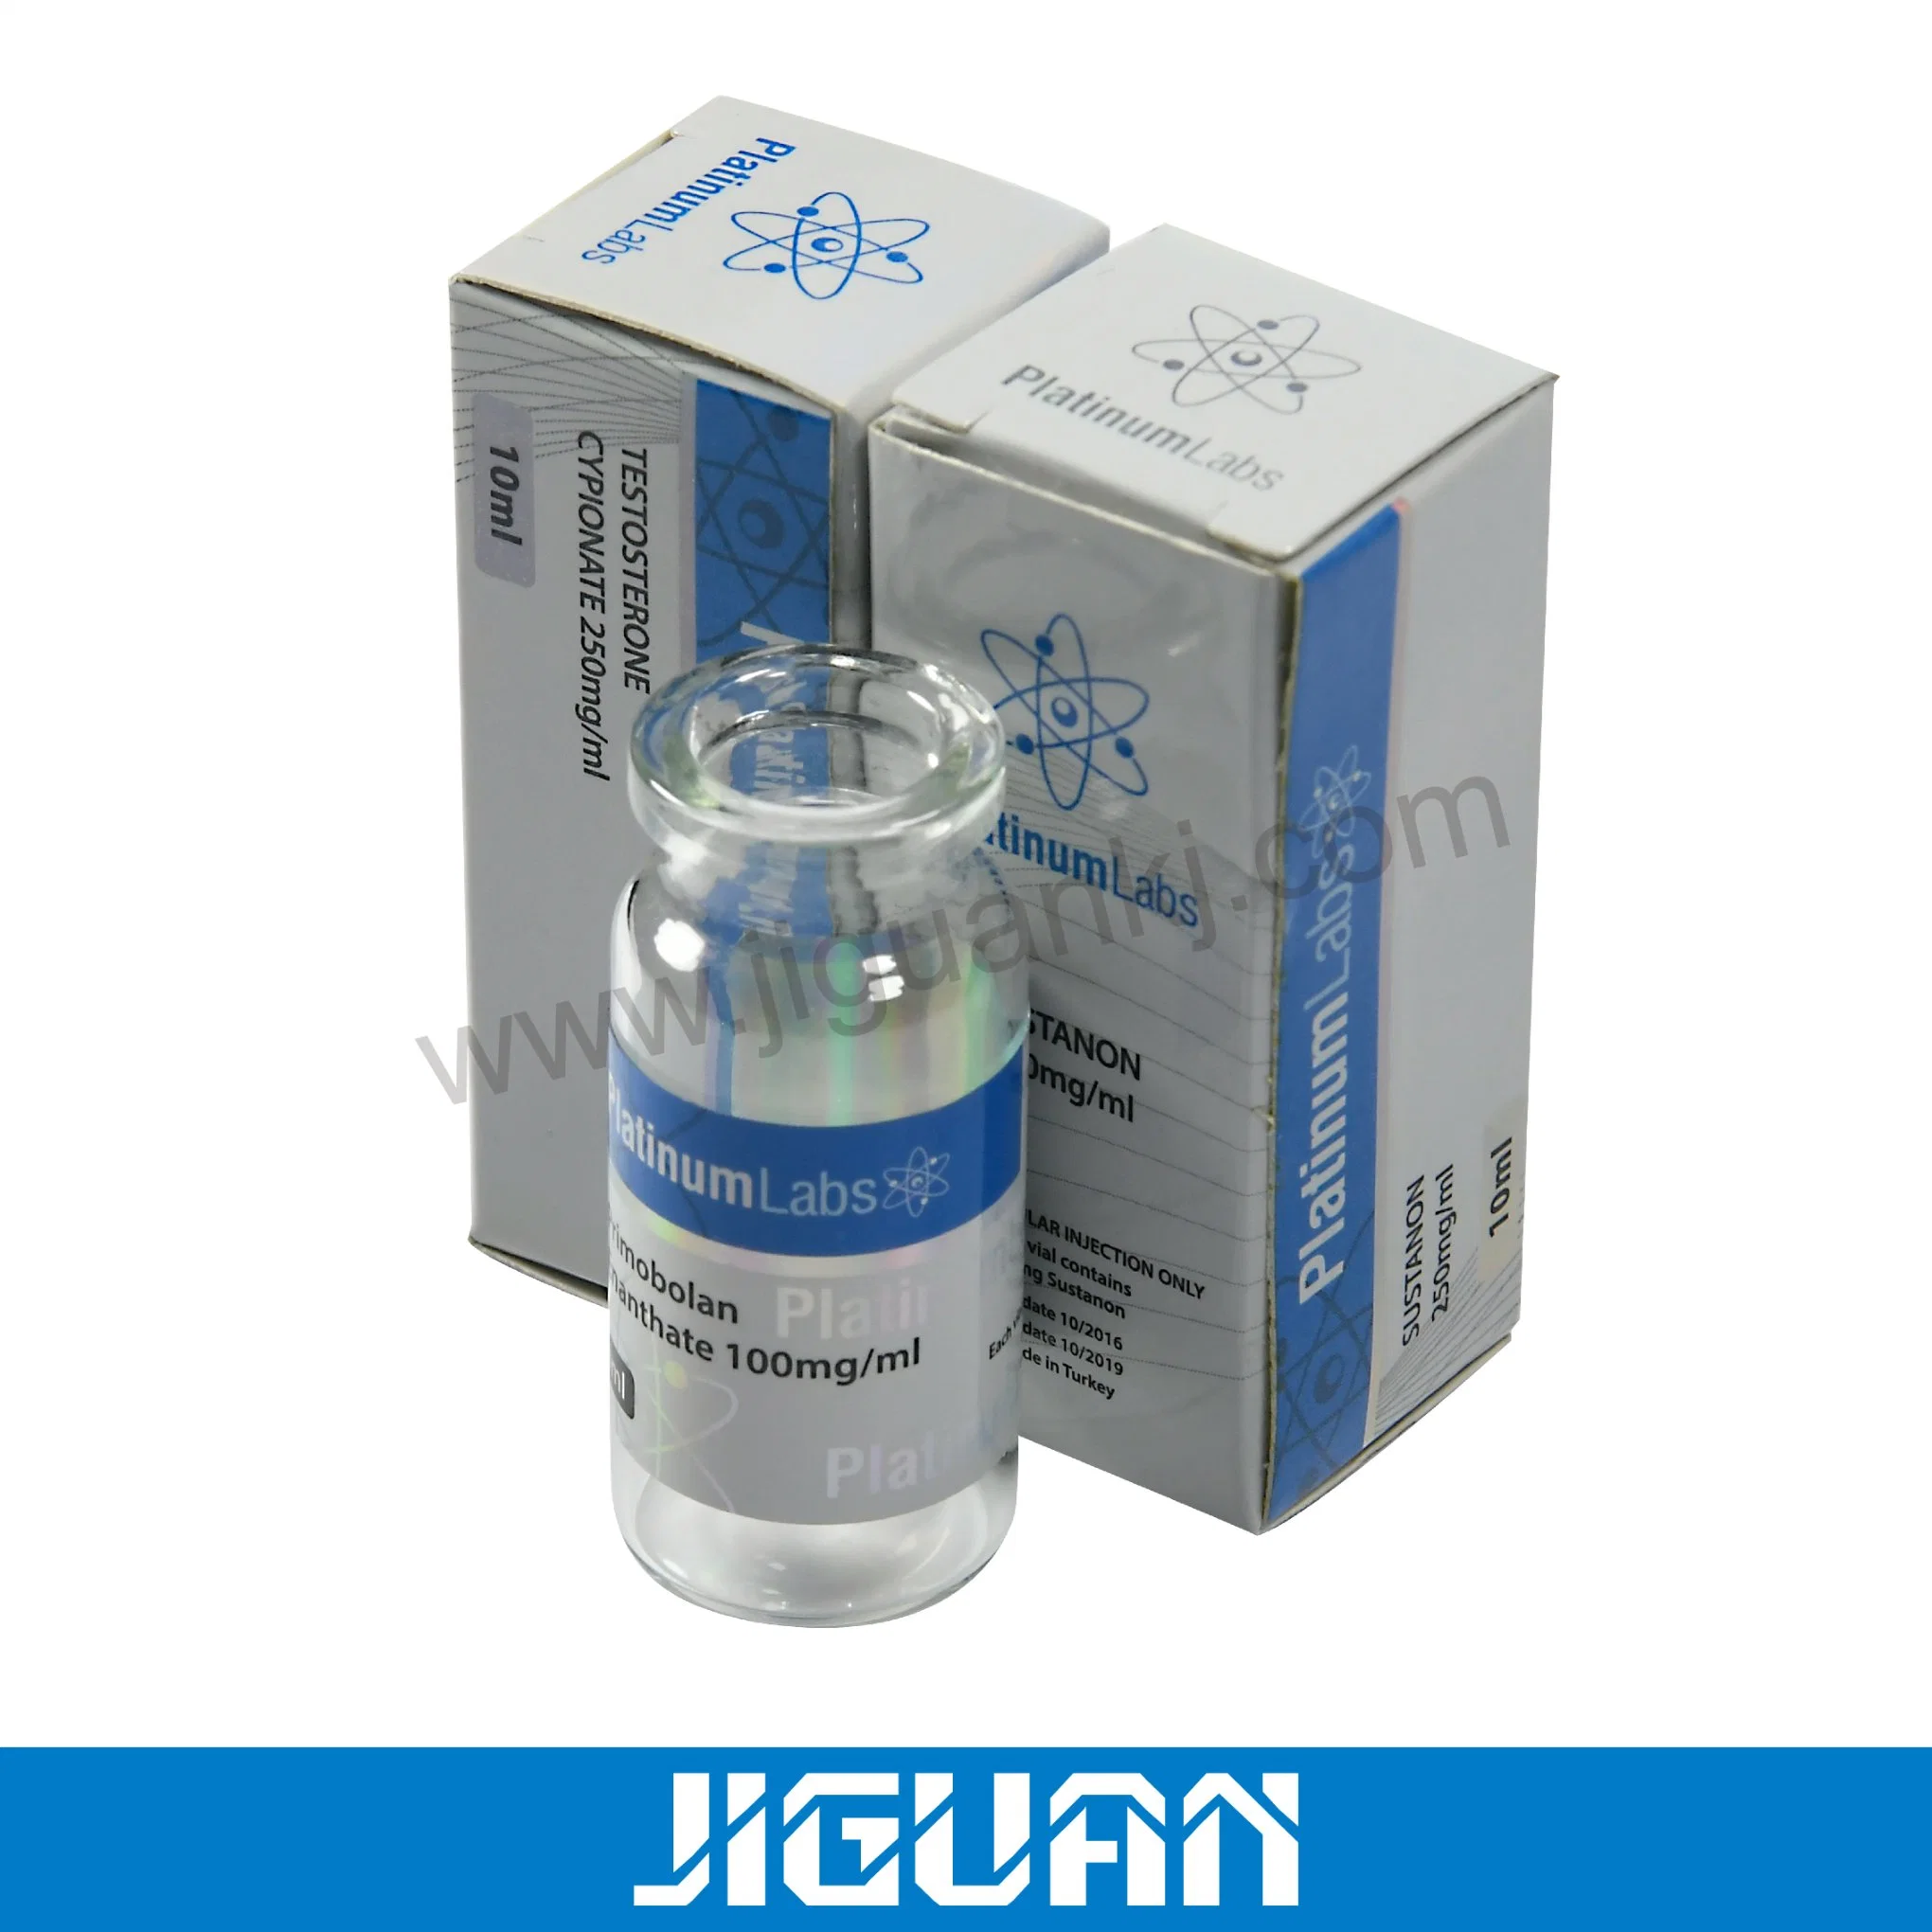 Supplier of Clear or Amber Glass Vial Bottle and Box